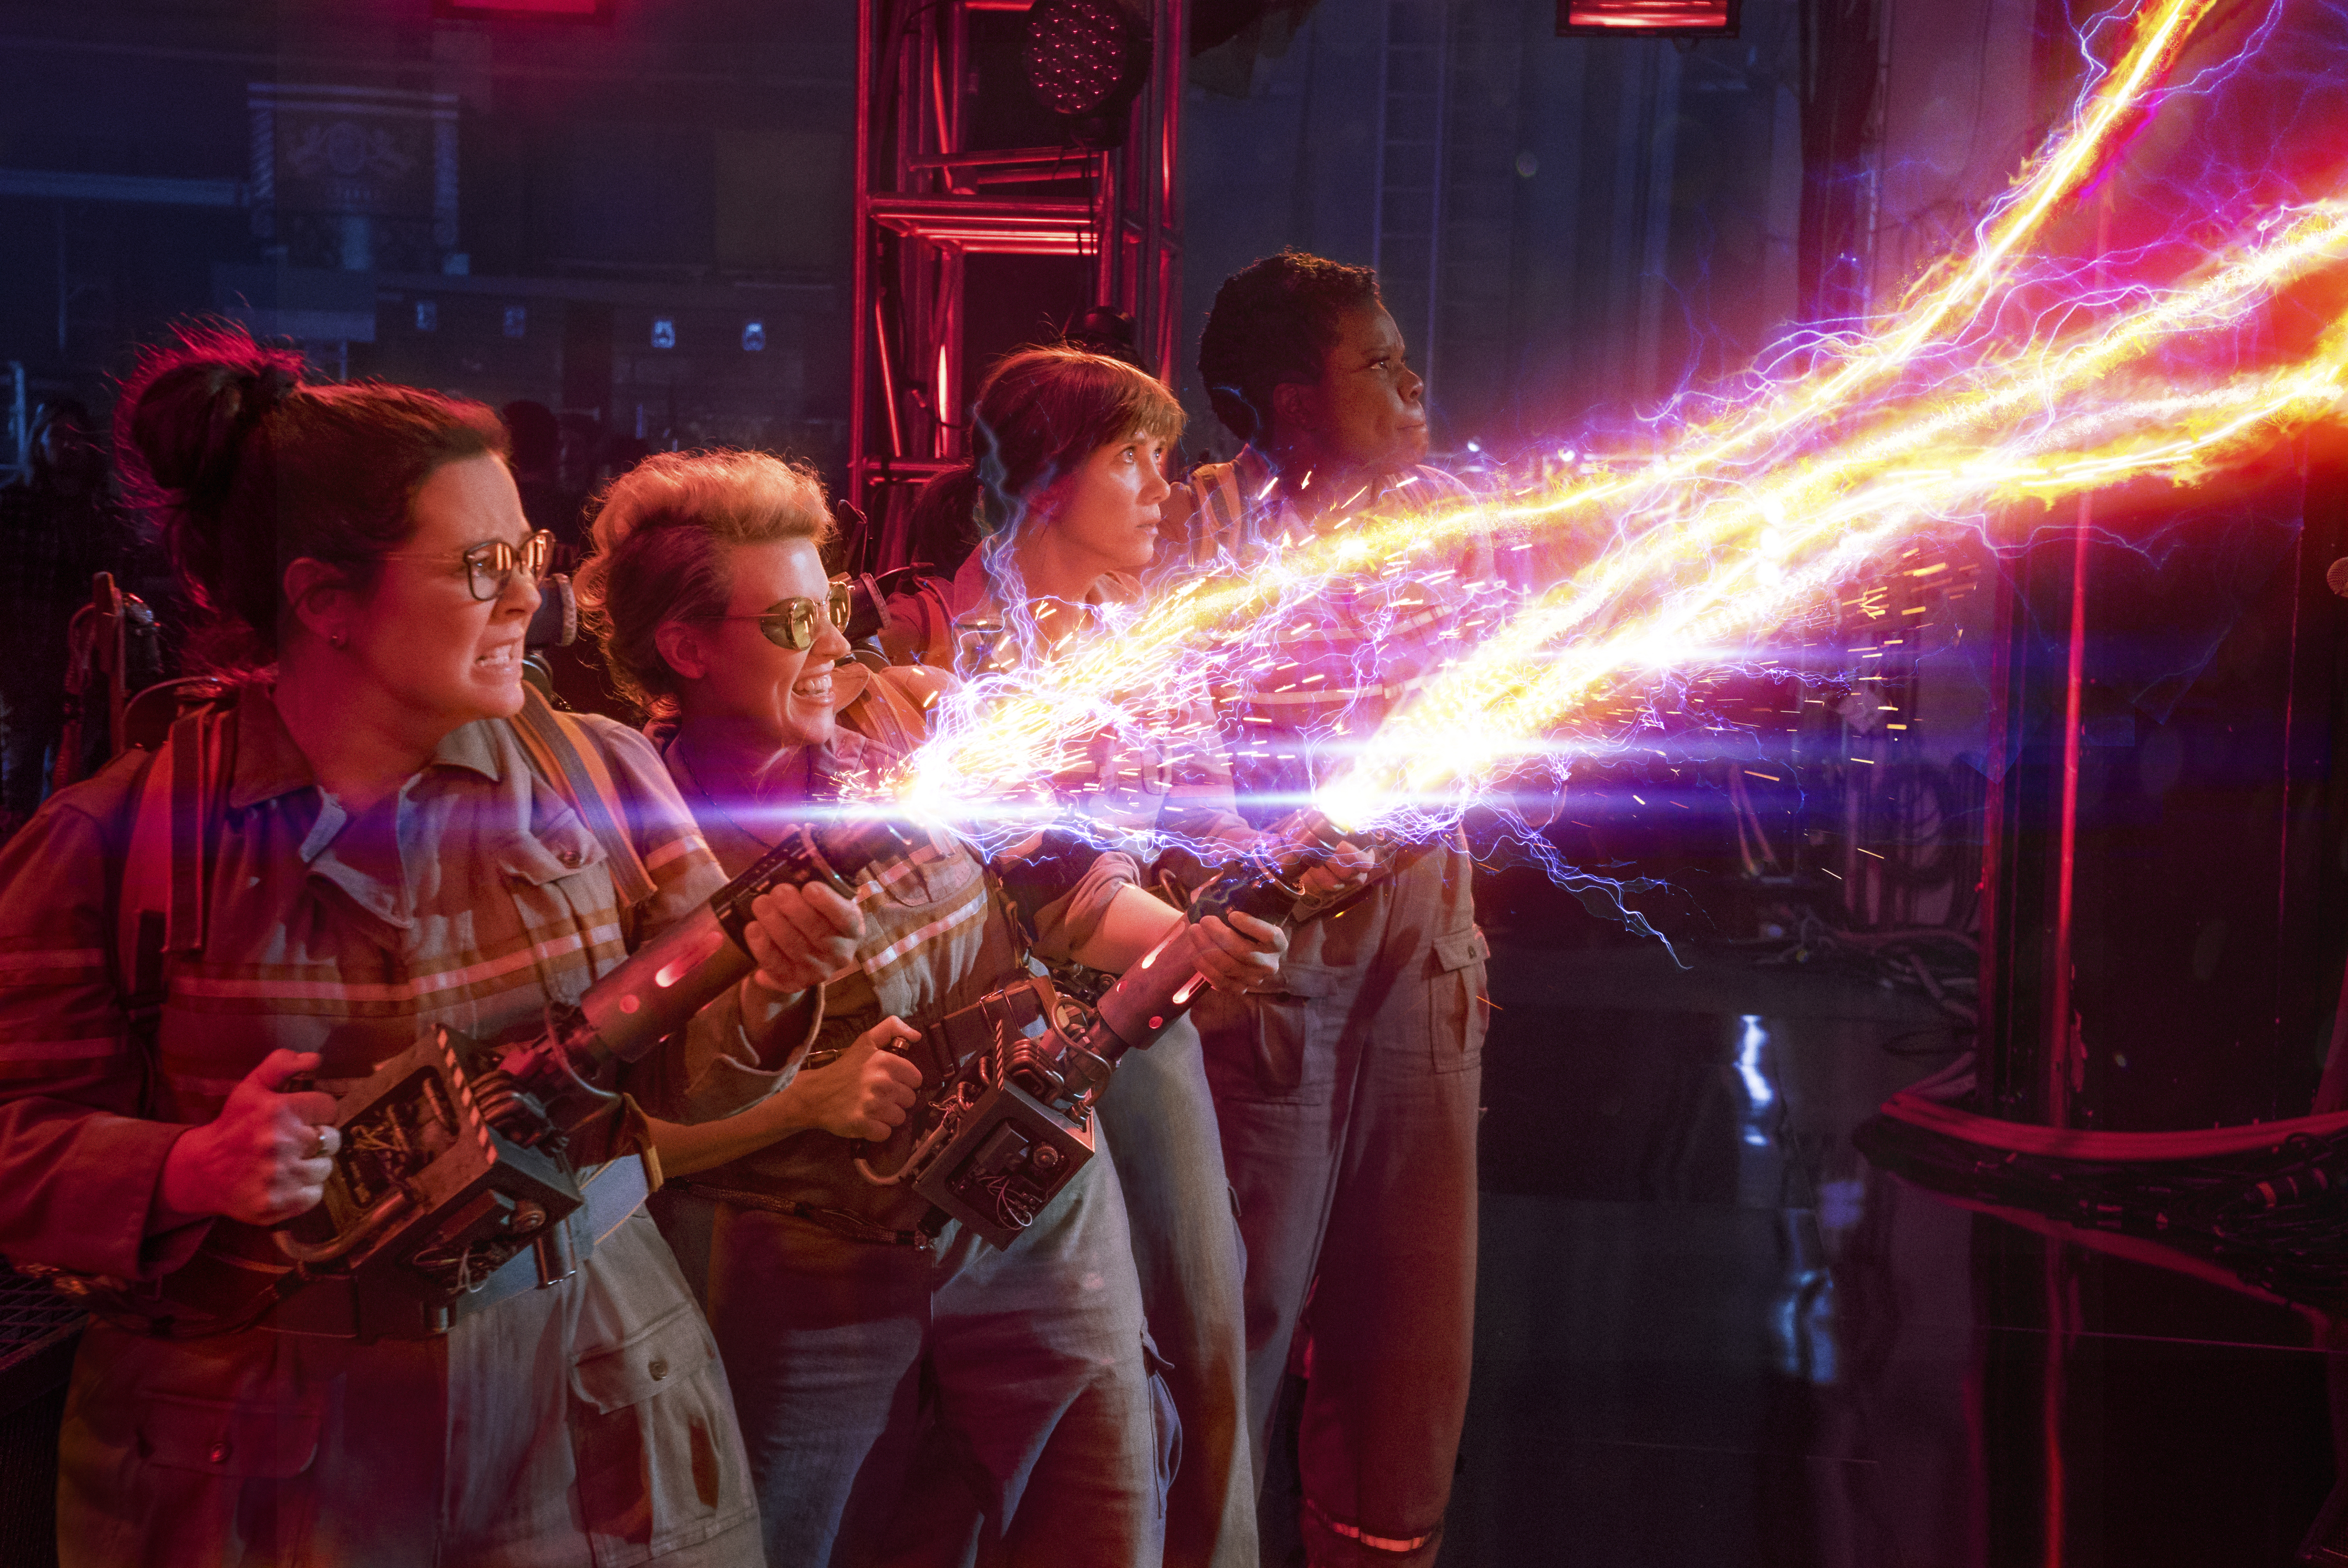 The Ghostbusters Abby (Melissa McCarthy), Holtzmann (Kate McKinnon), Erin (Kristen Wiig) and Patty (Leslie Jones). Photo courtesy: Columbia Pictures